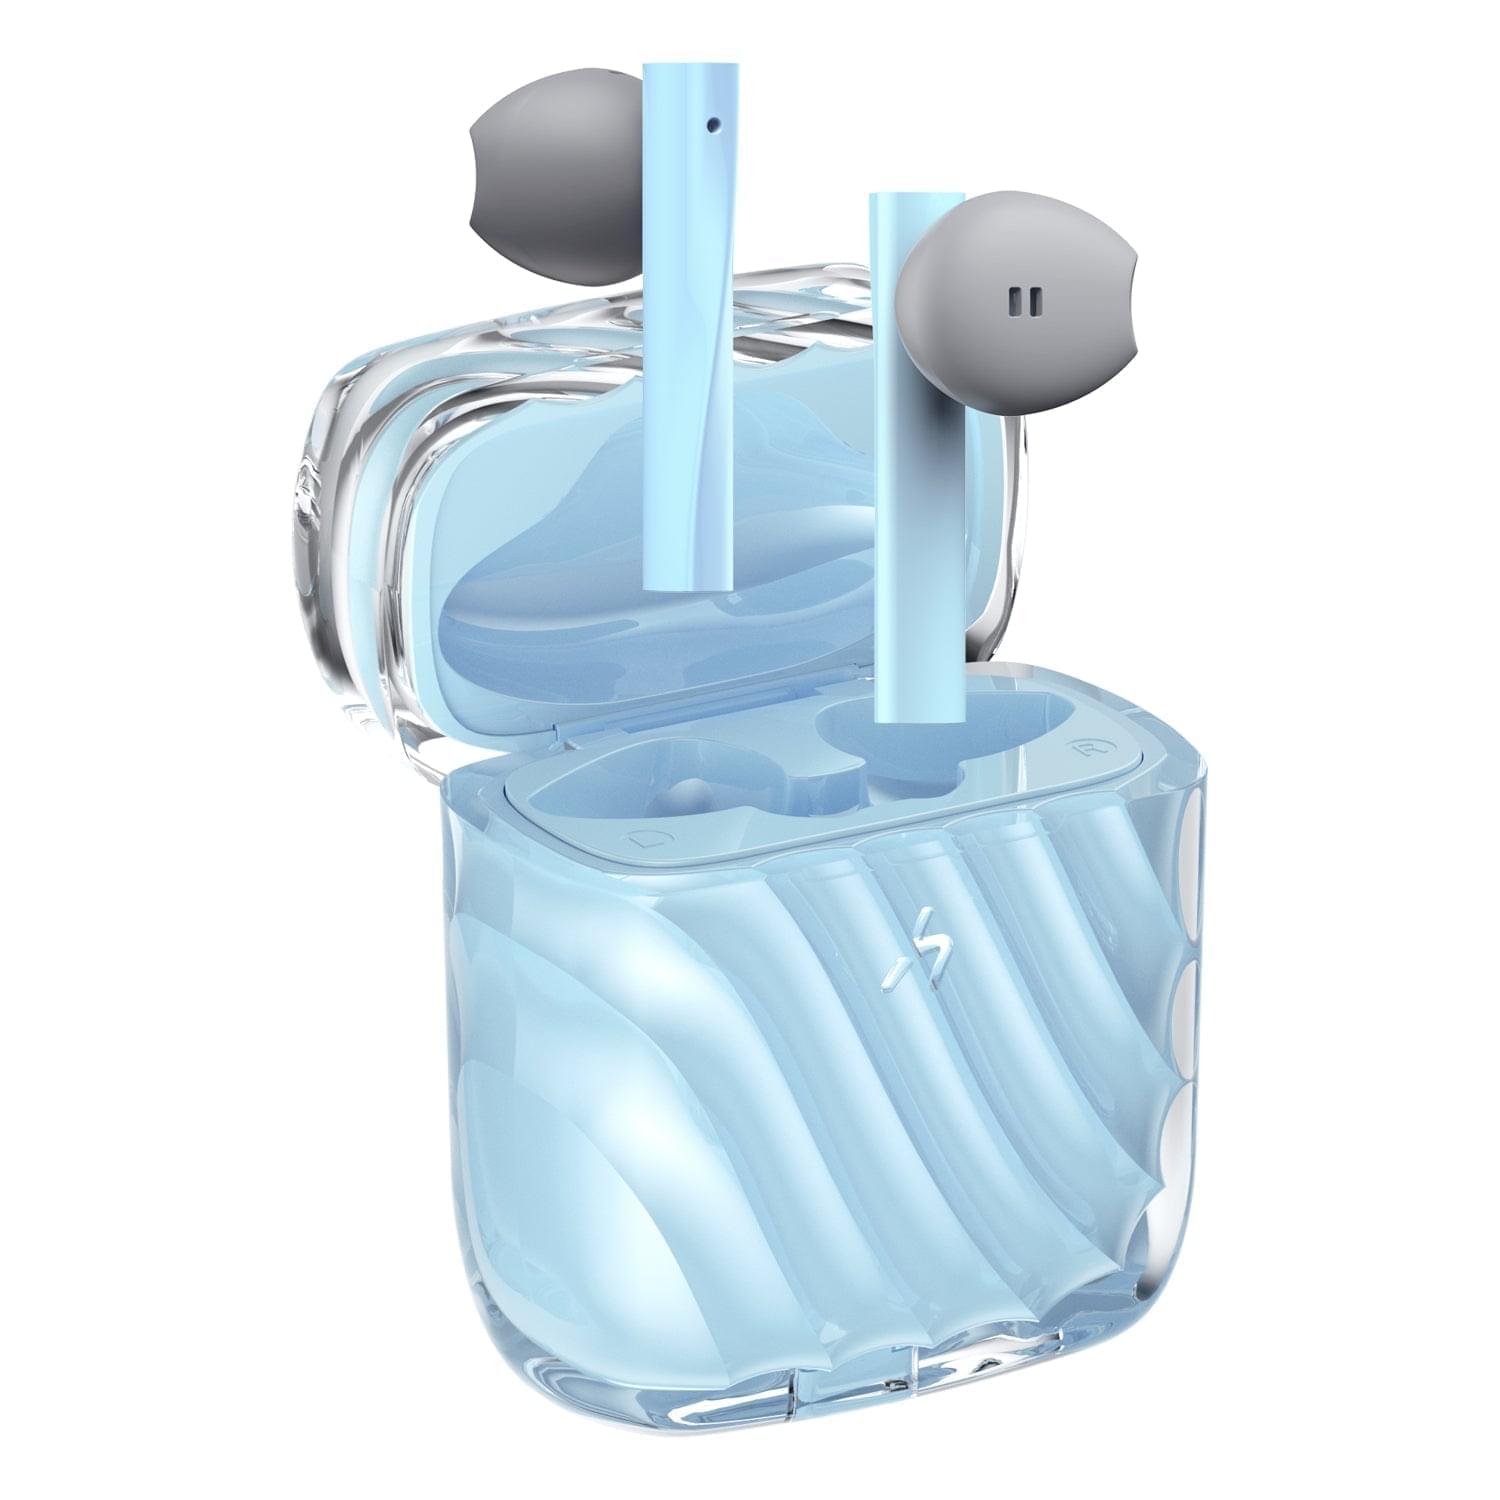 Low Latency Wireless Earbuds for Android & iPhone - HAKII ICE (Blue)